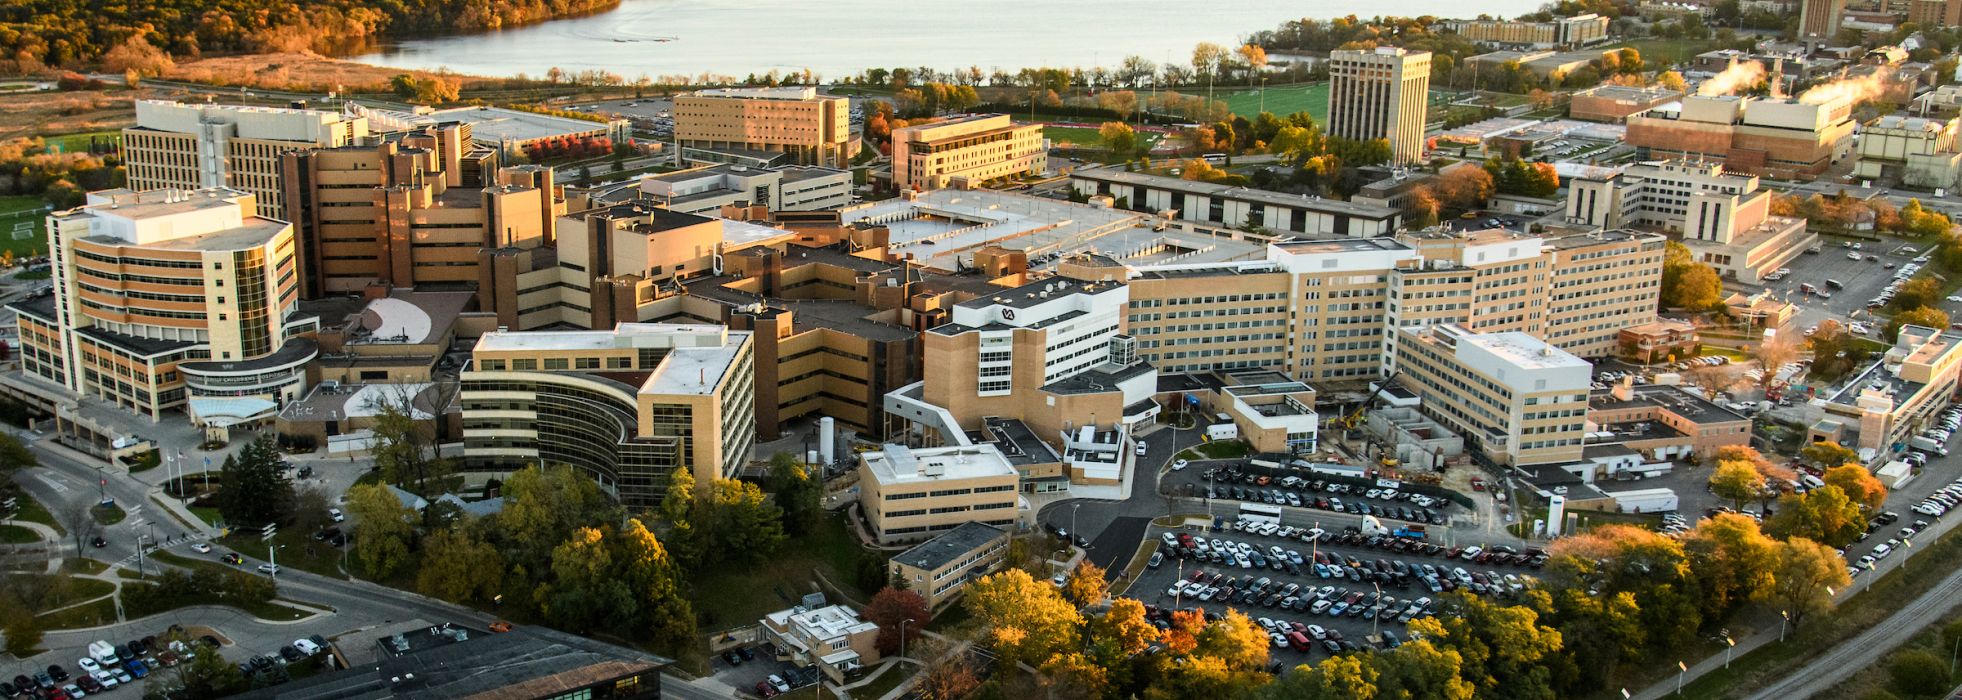 Aerial photo of the University of Wisconsin-Madison medical campus